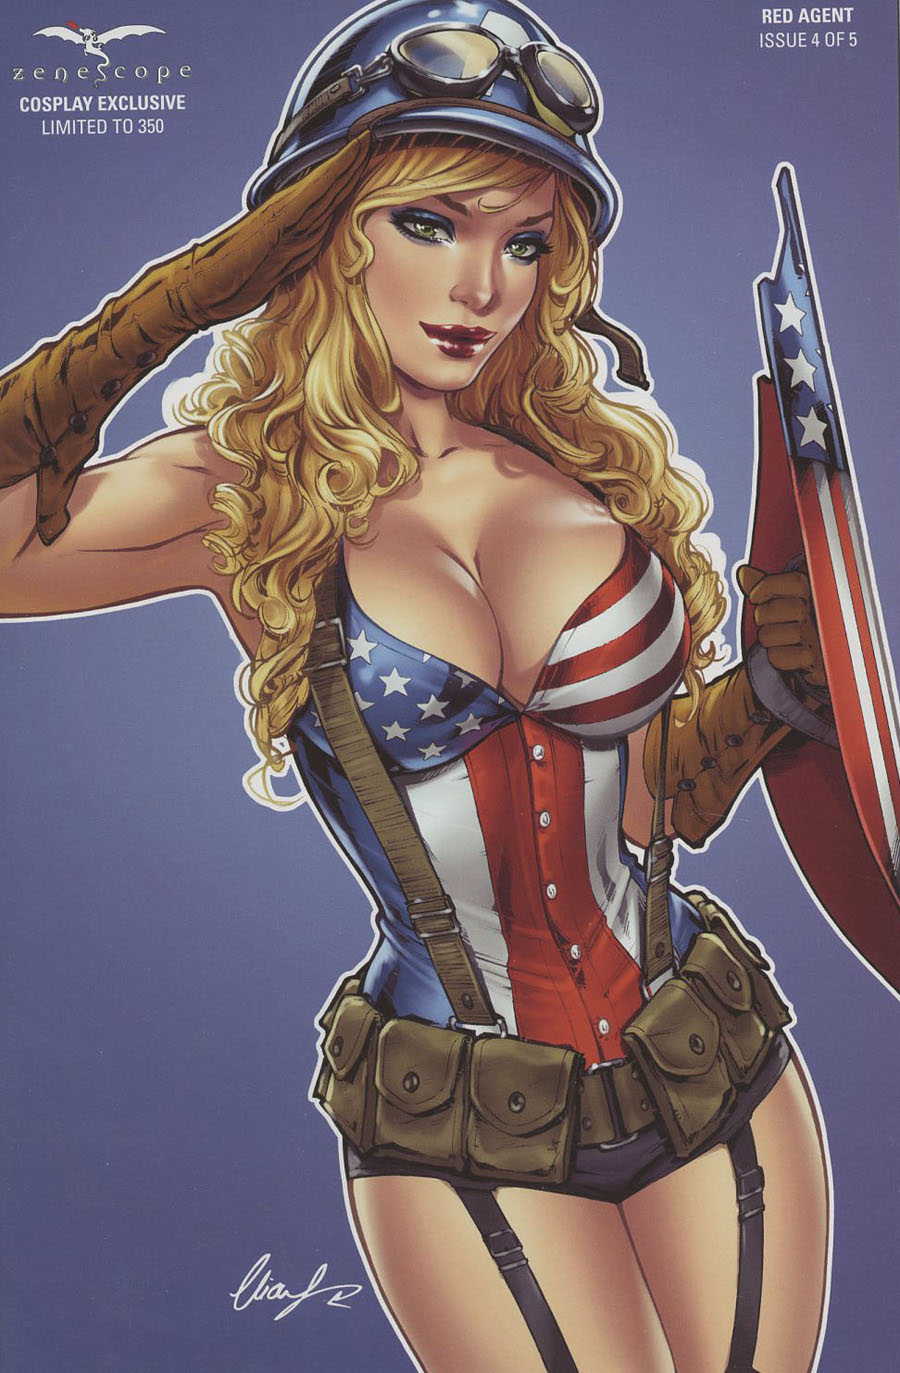 Grimm Fairy Tales Presents Red Agent #4 Cover F Cosplay Exclusive Elias Chatzoudis Variant Cover